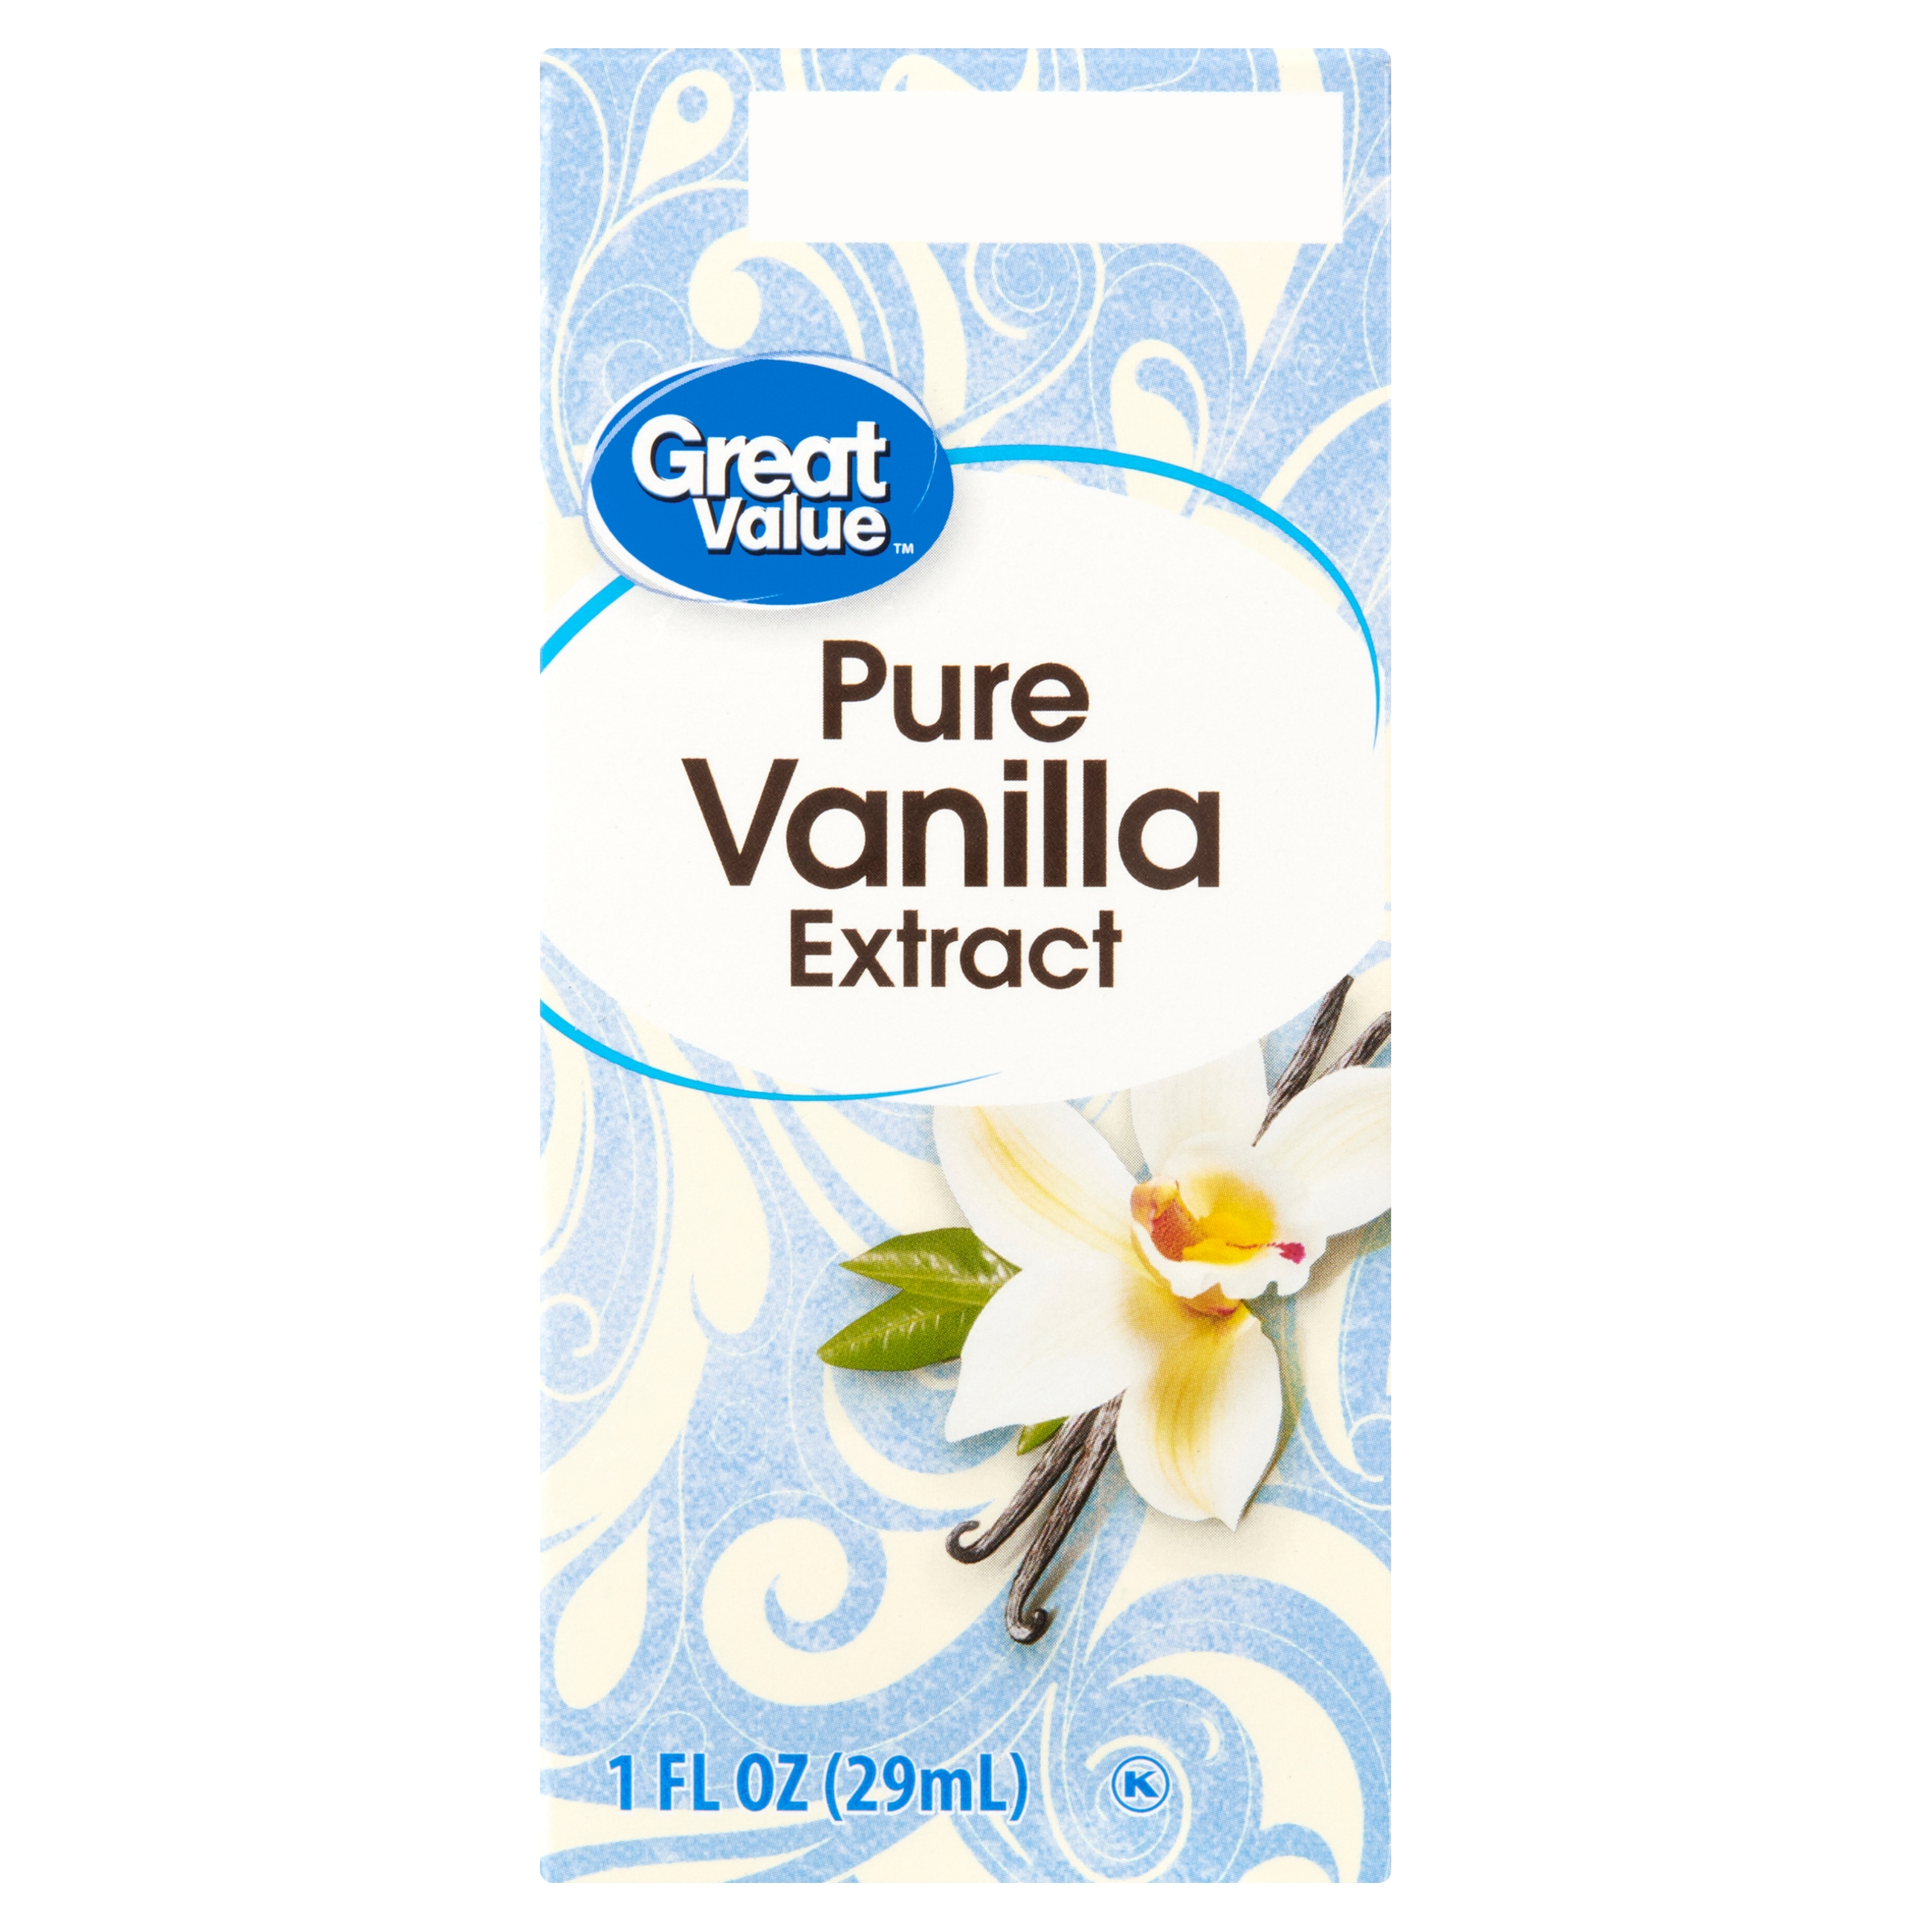 Great Value Pure Vanilla Extract, 1 fl oz (Ambient, Plastic Container) - image 1 of 7